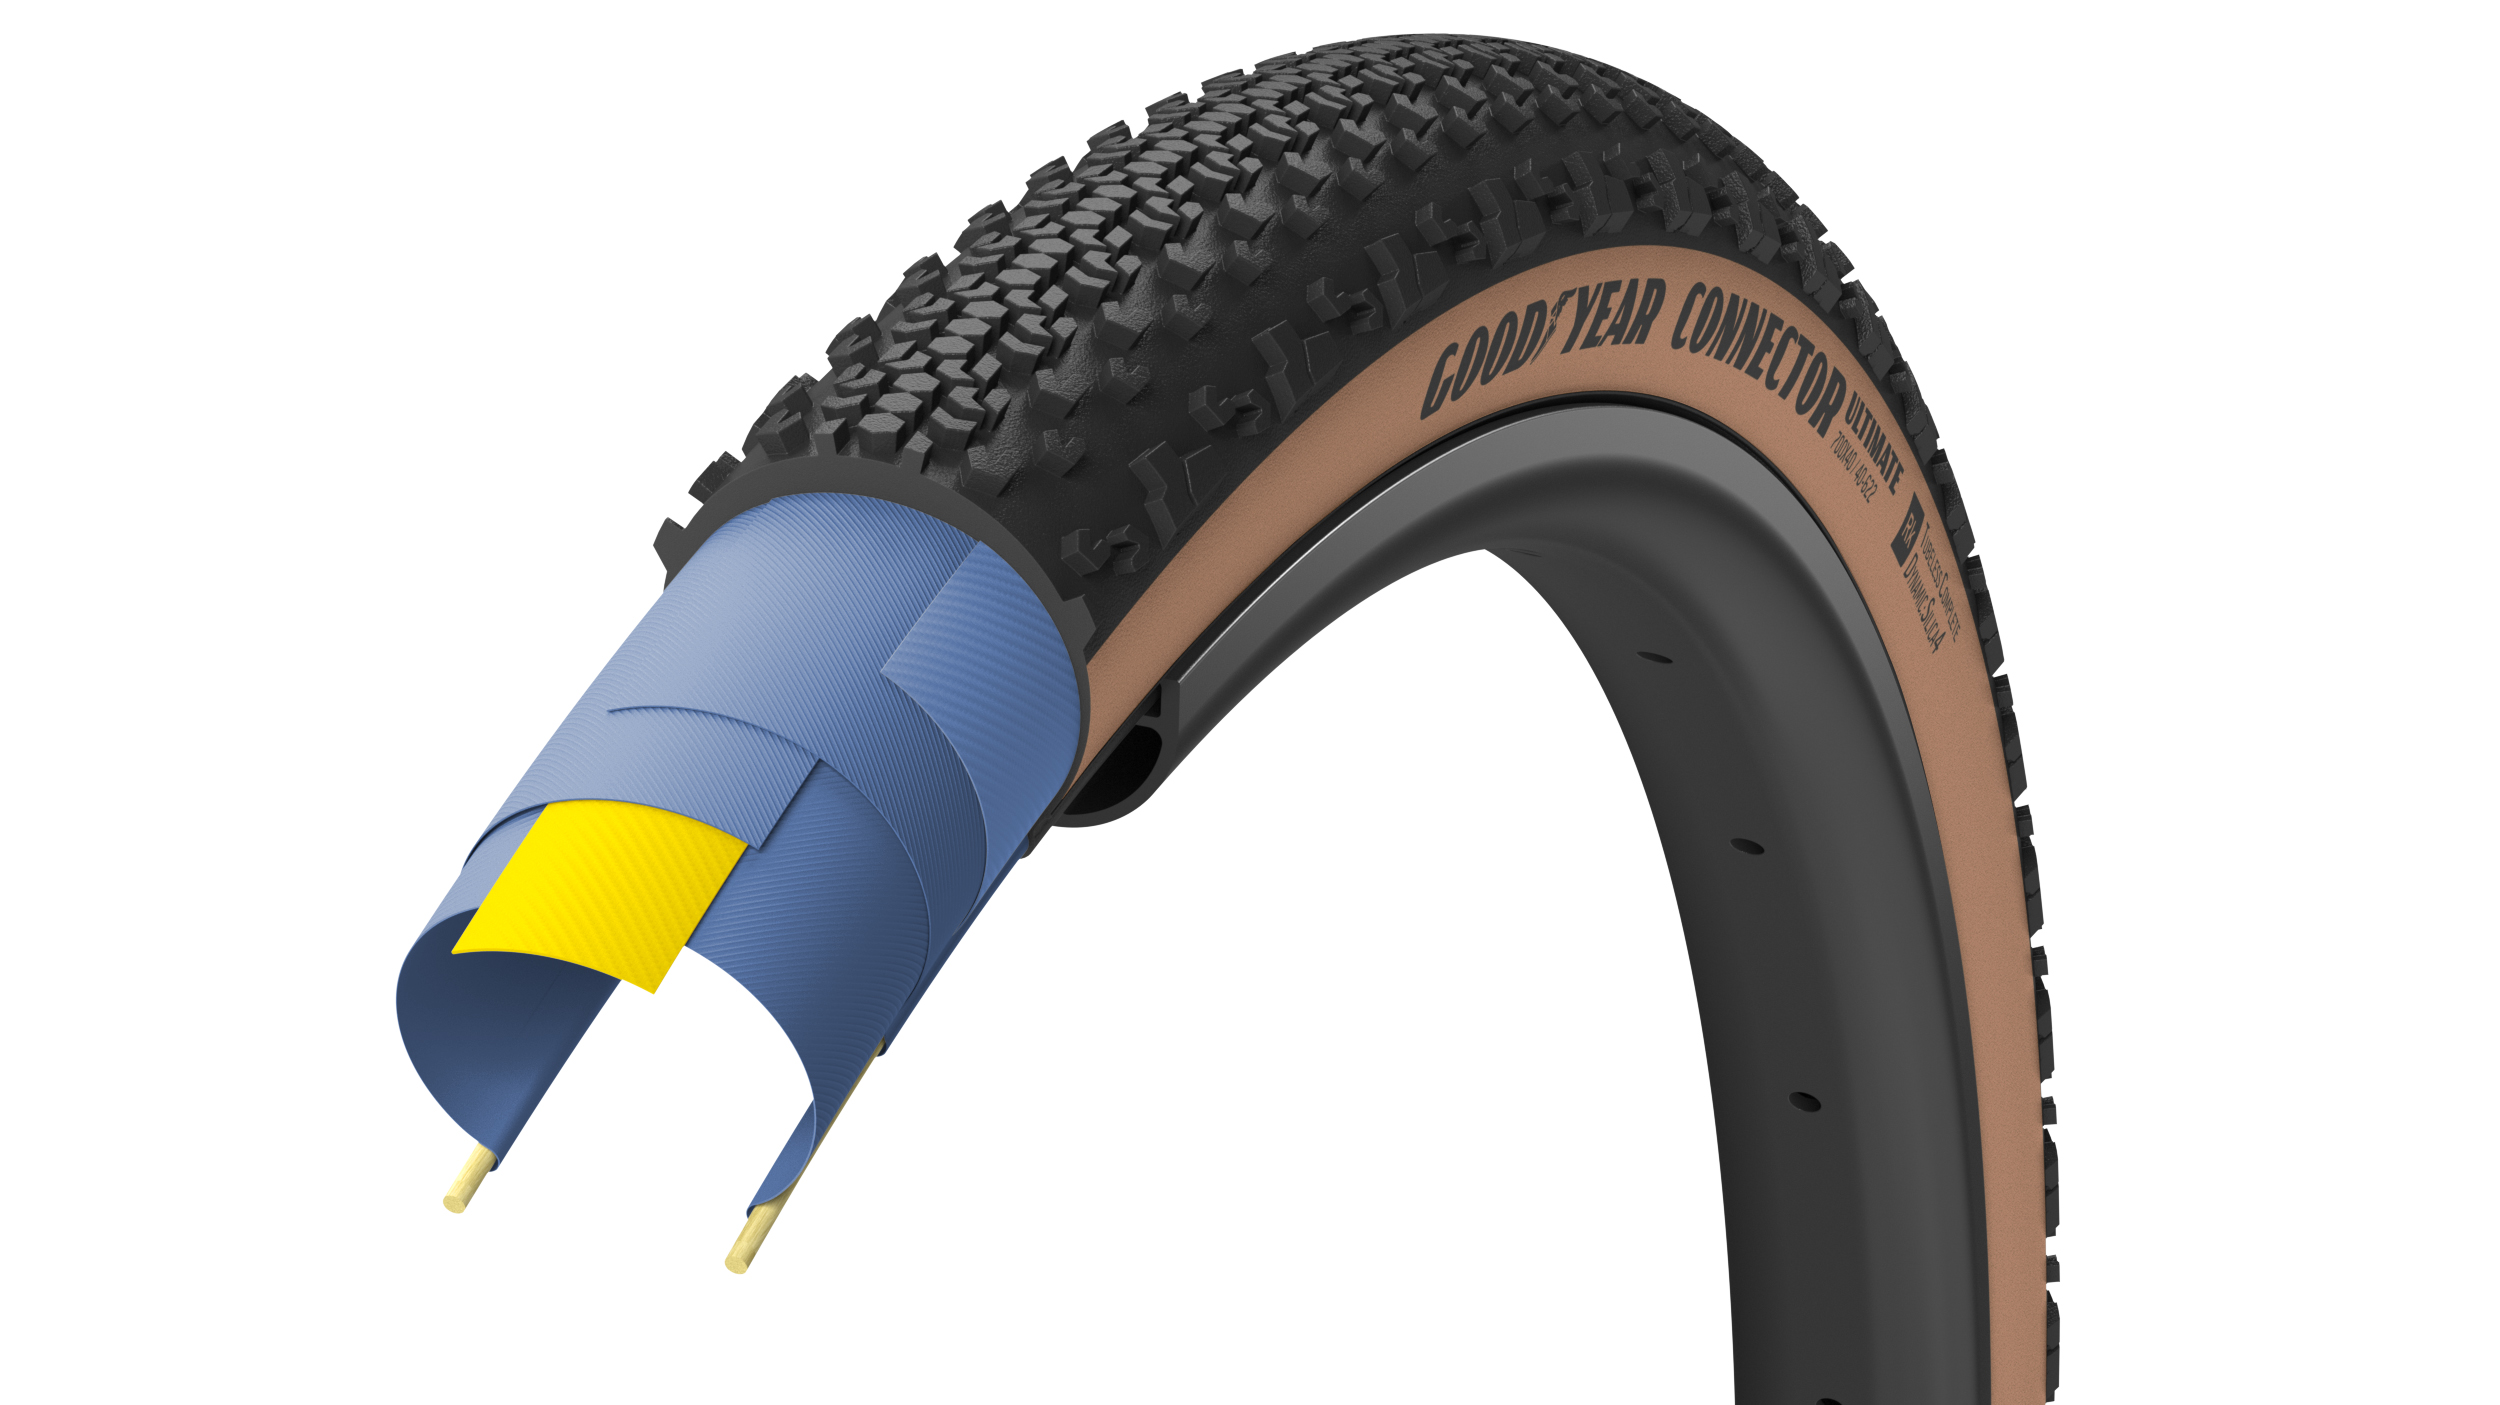 Покрышка 700x45 (45-622) GoodYear Connector Ultimate Tubeless Complete Folding Blk/Tan, 120tpi фото 